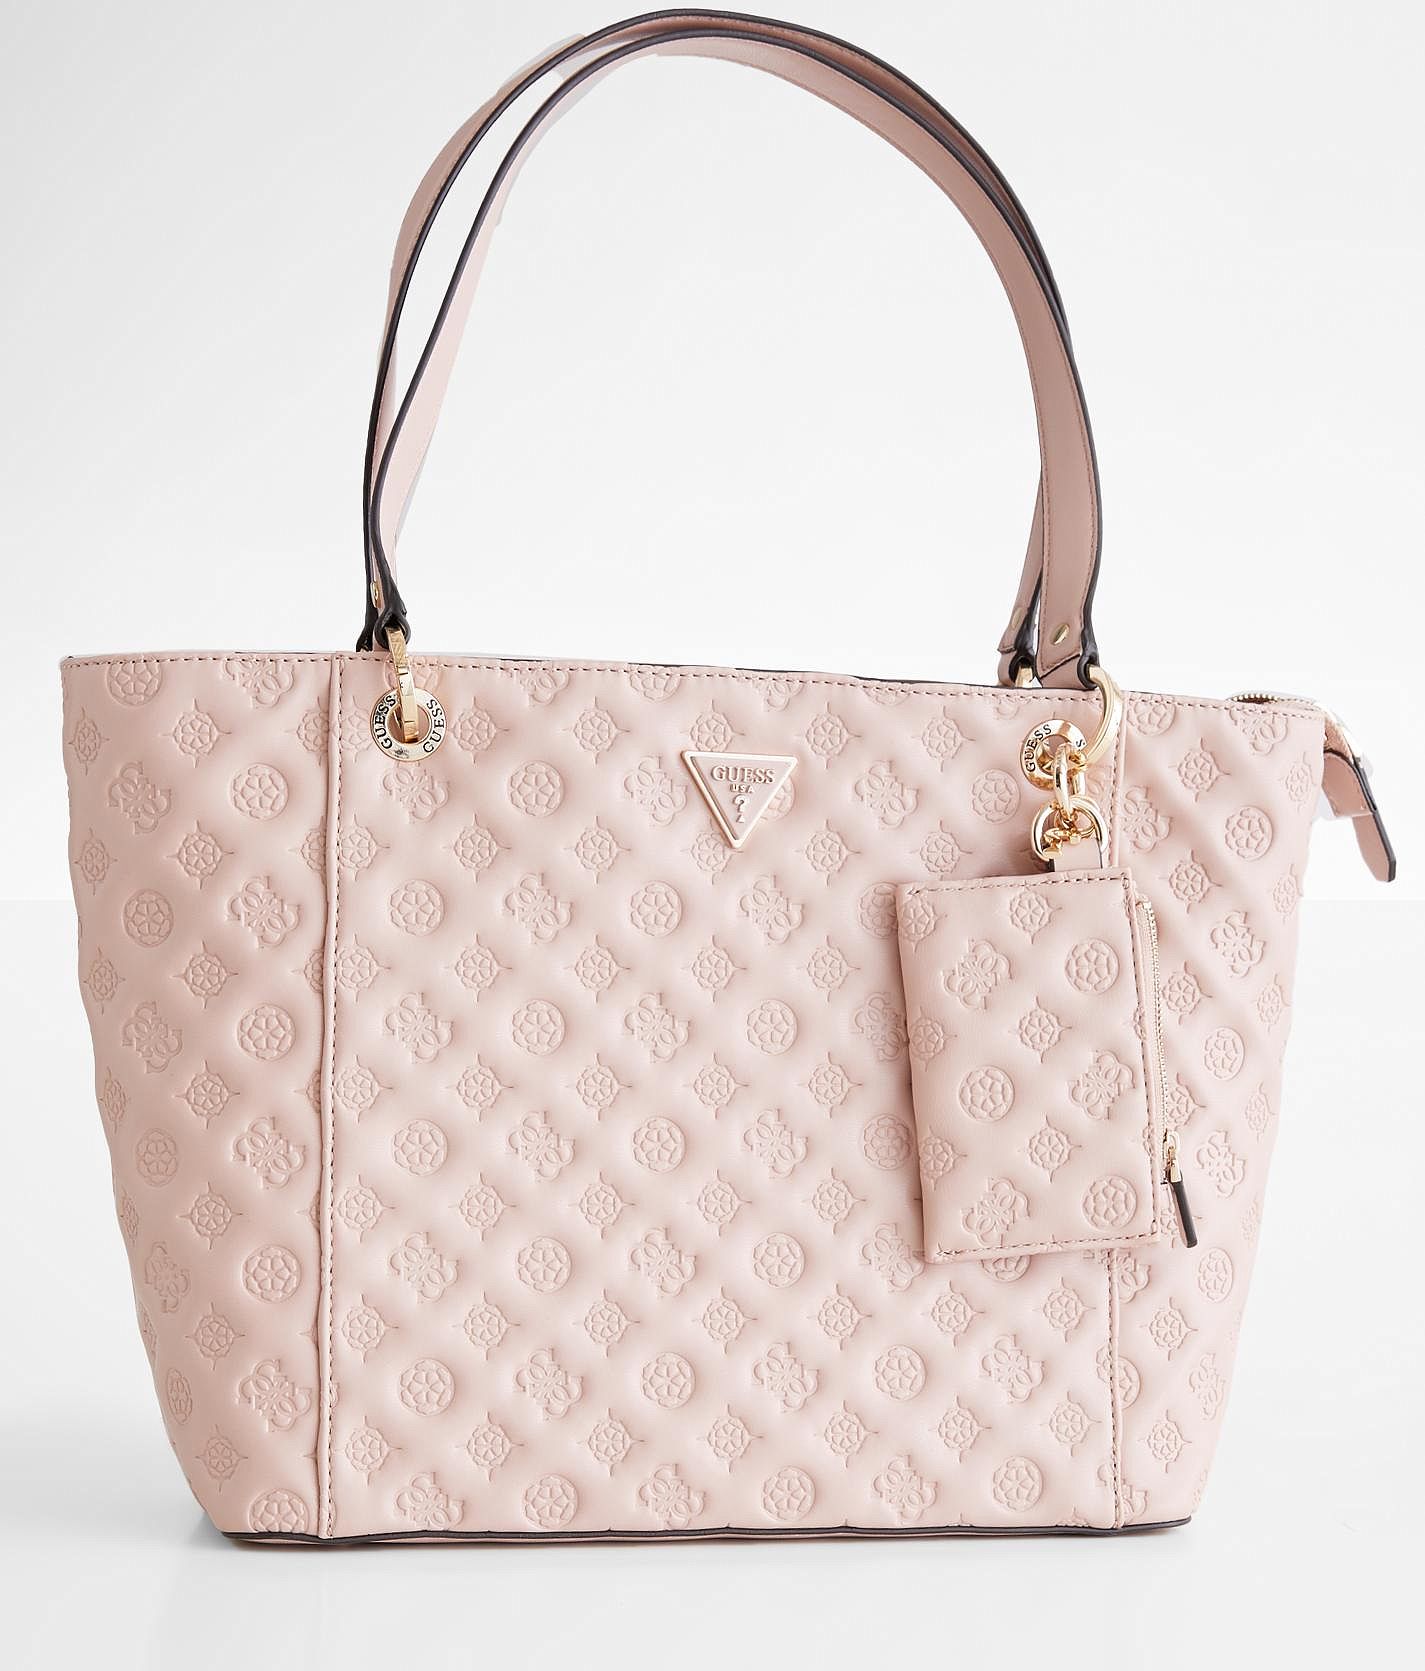 GUESS Rose Bags & Handbags for Women for sale